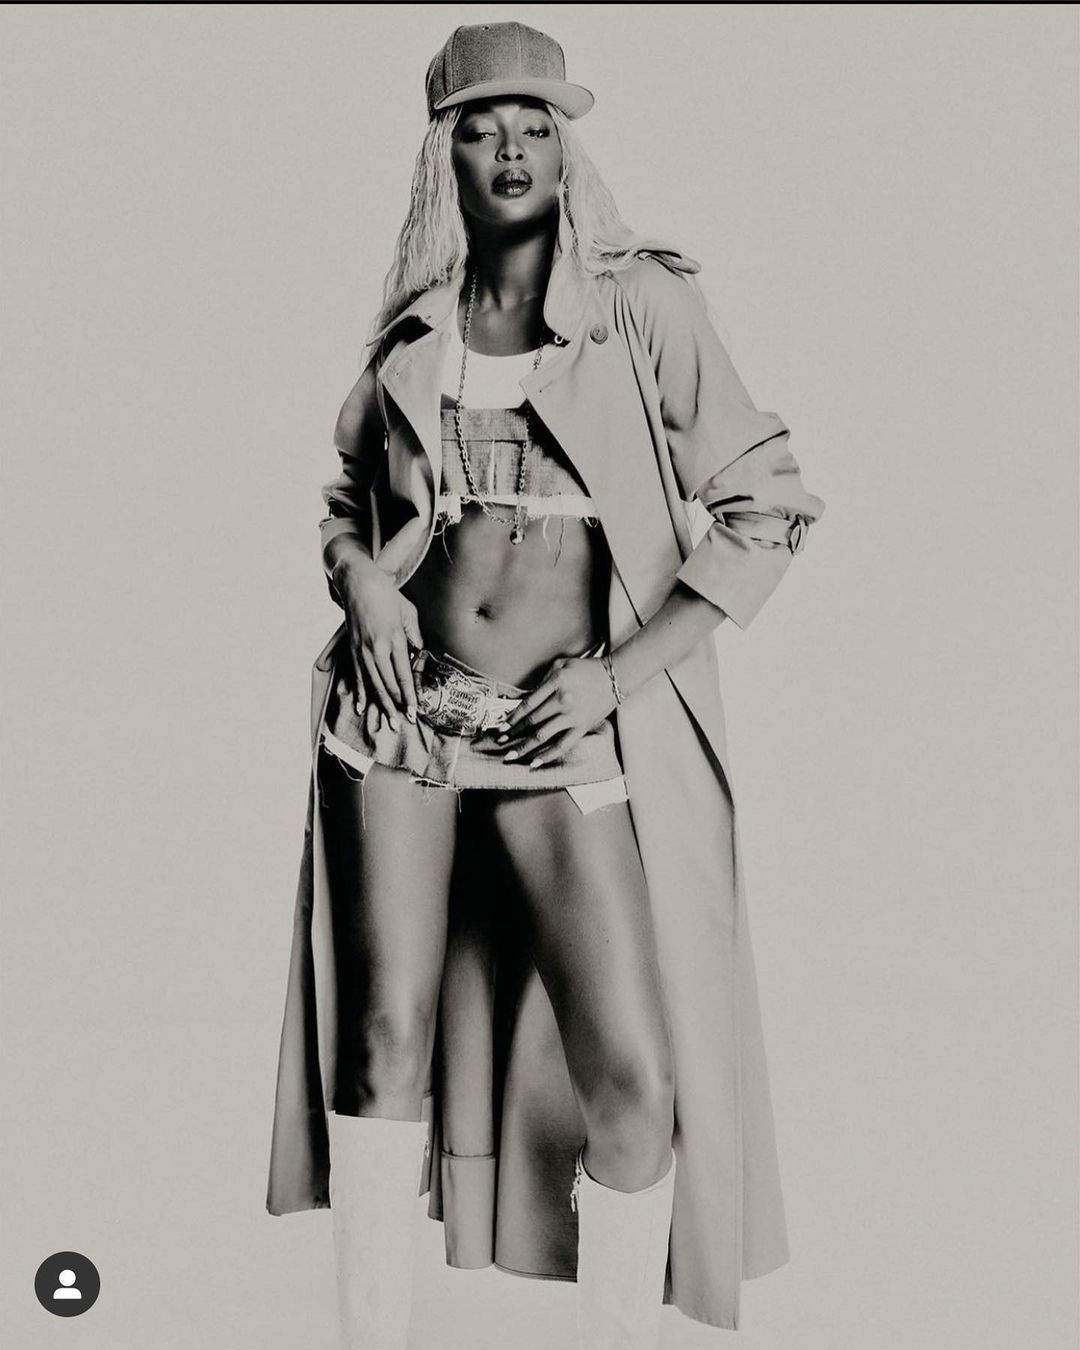 Naomi posted a ravishing black and white photo of herself. She was posing for the W magazine photoshoot